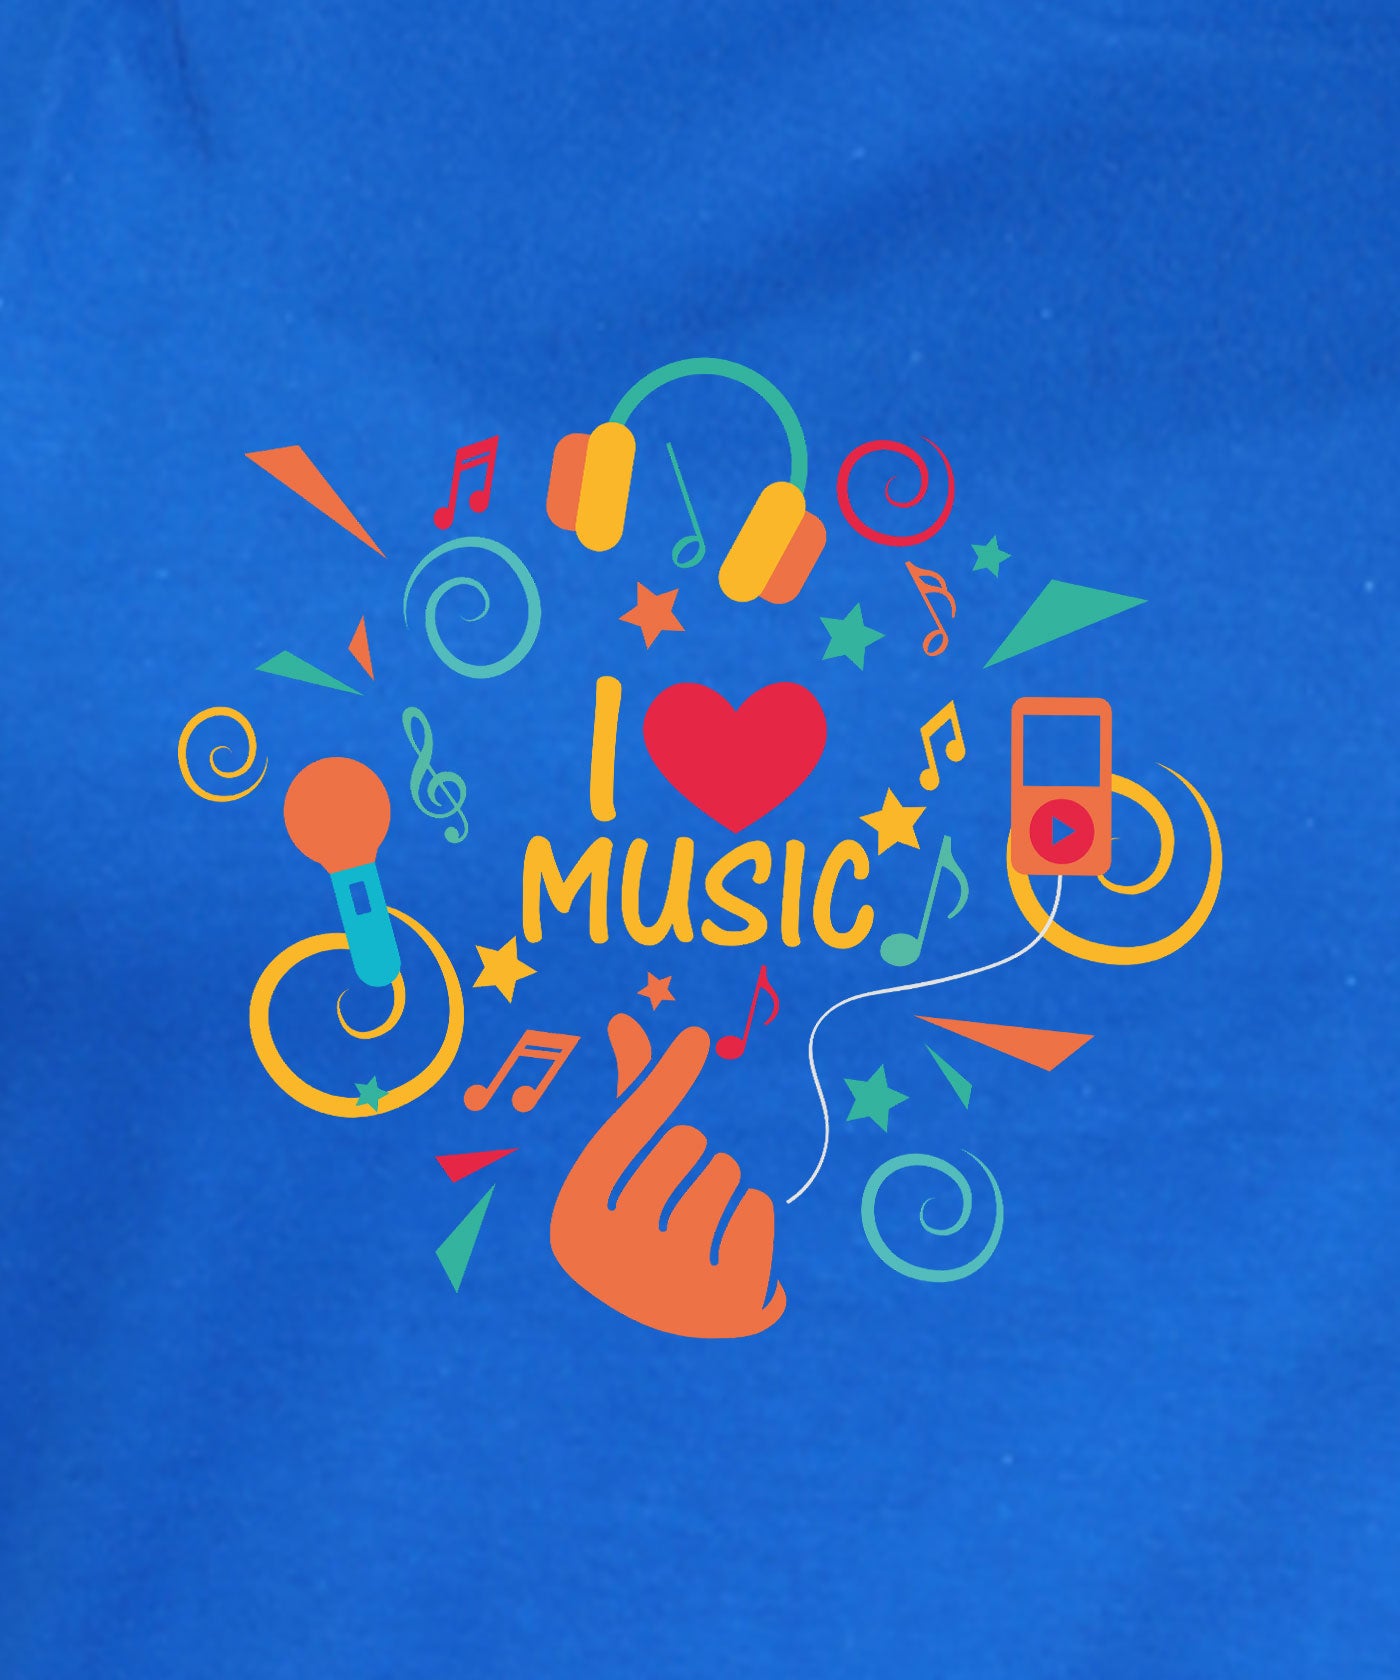 I Love Music - Premium Round Neck Cotton Tees for Women - Electric Blue